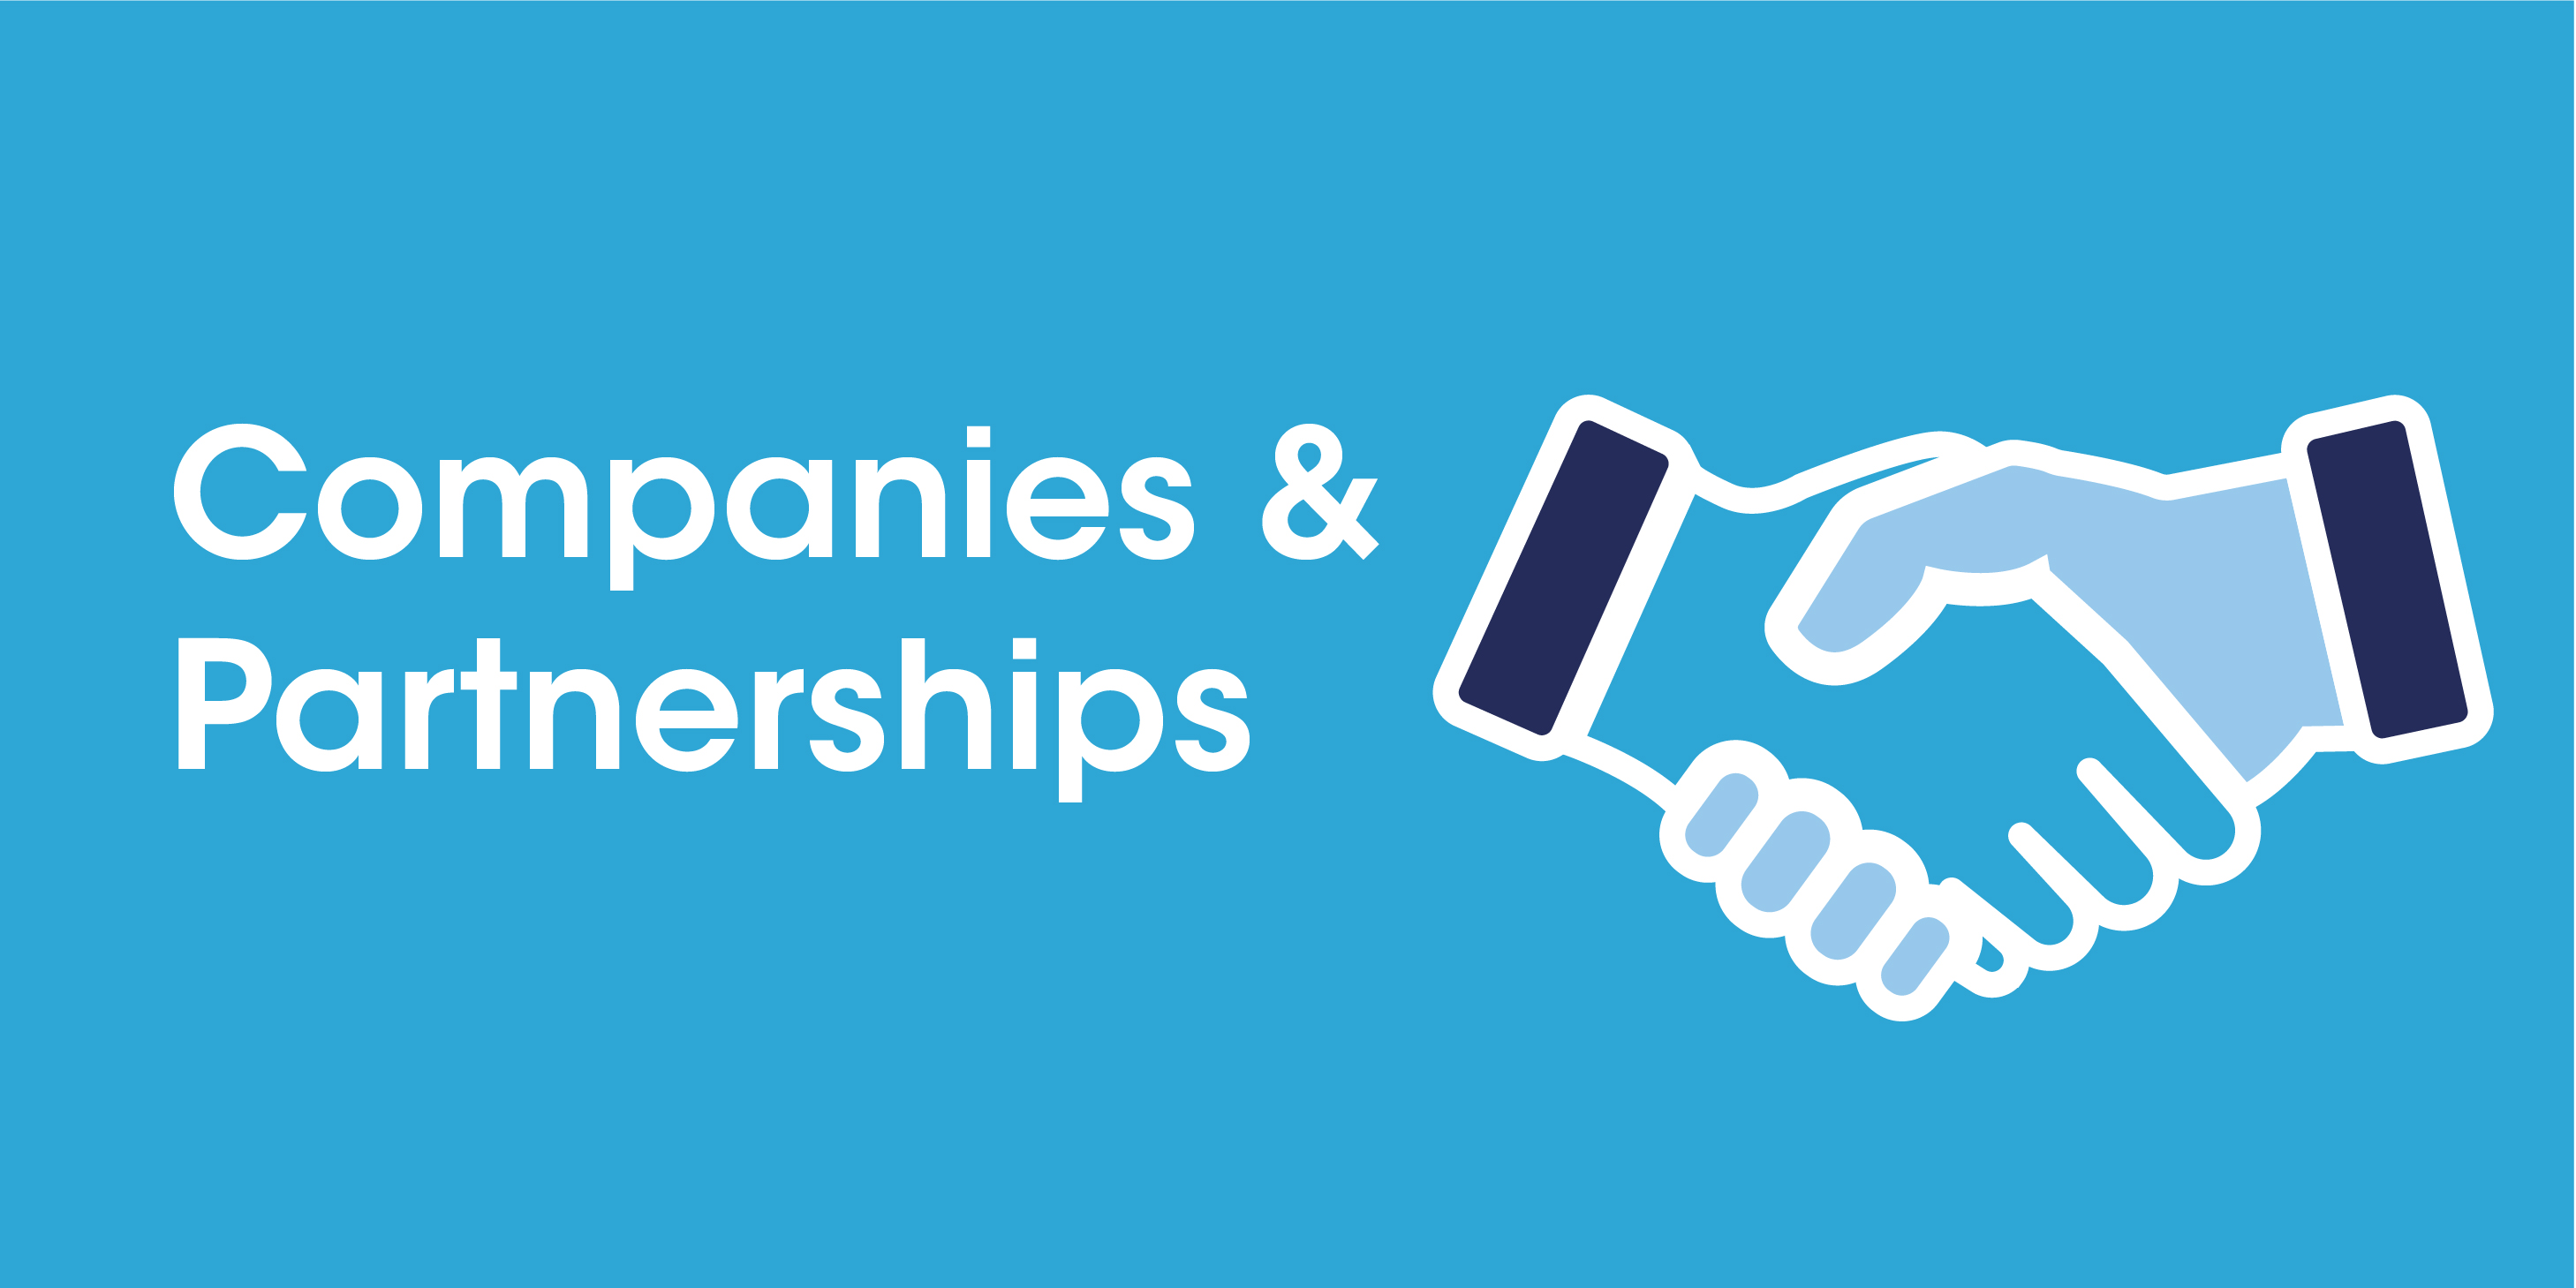 A handshake. Companies and Partnerships letters in white. Light blue background.